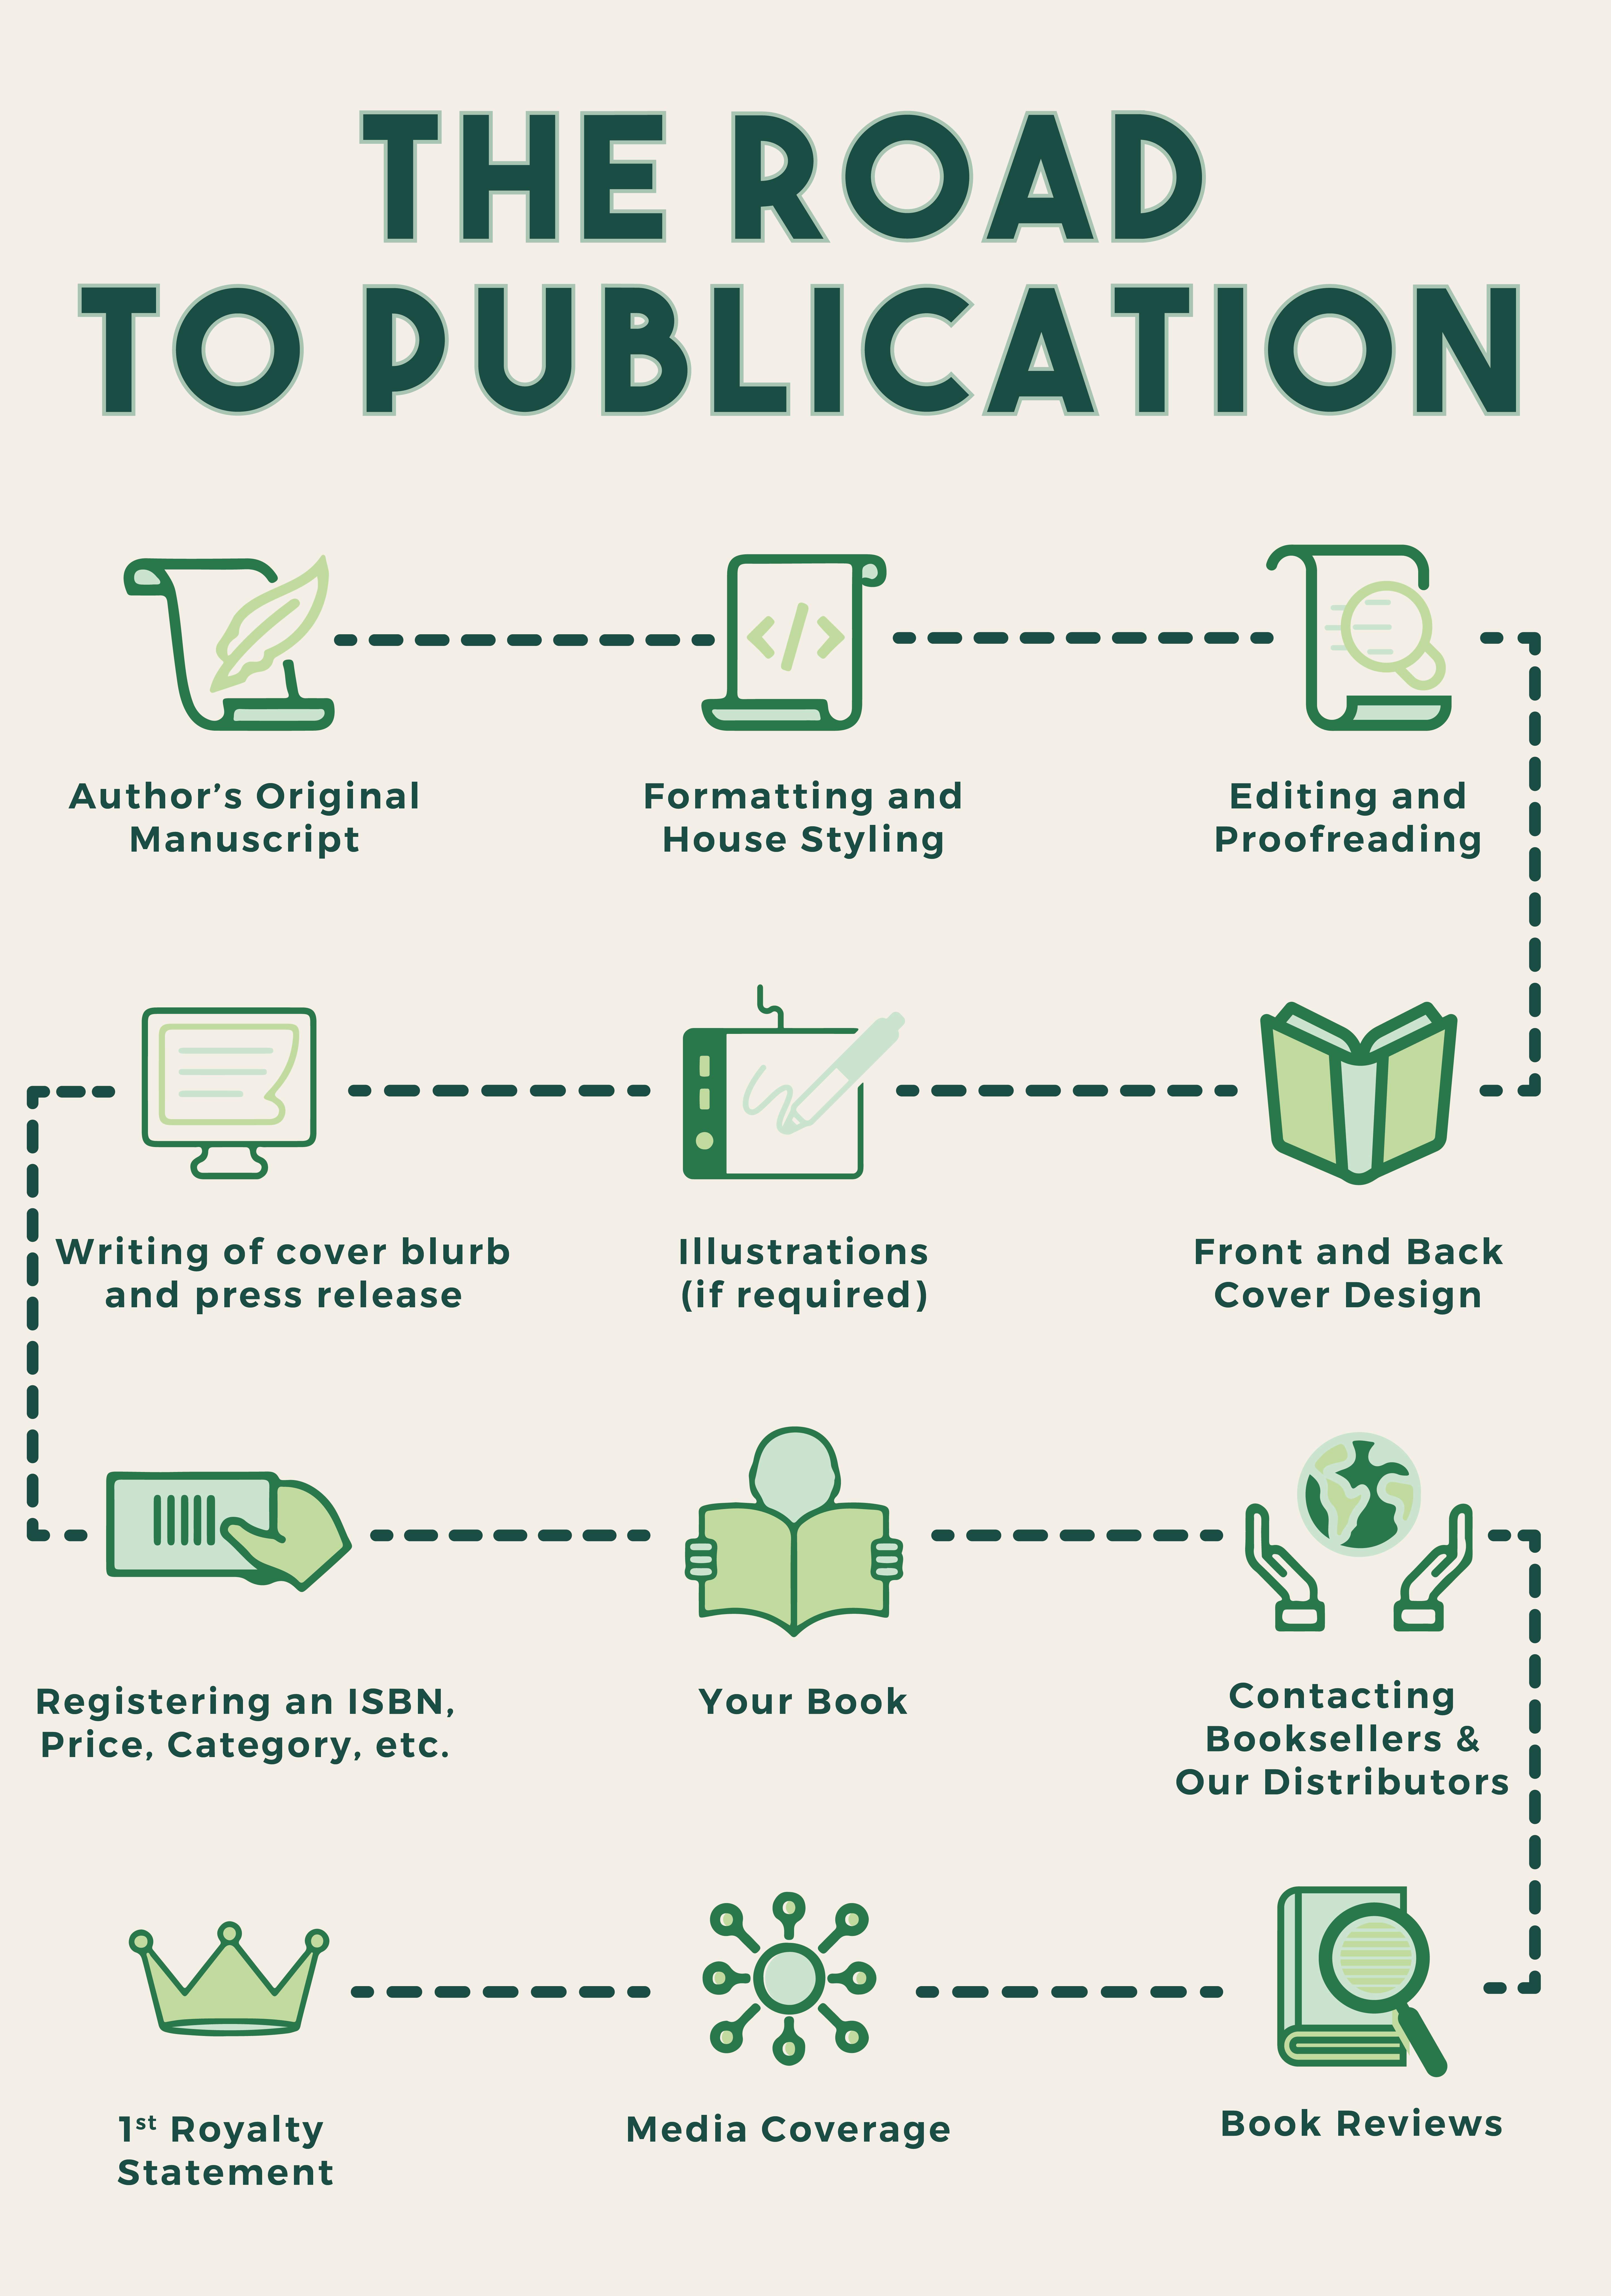 Book Publishers